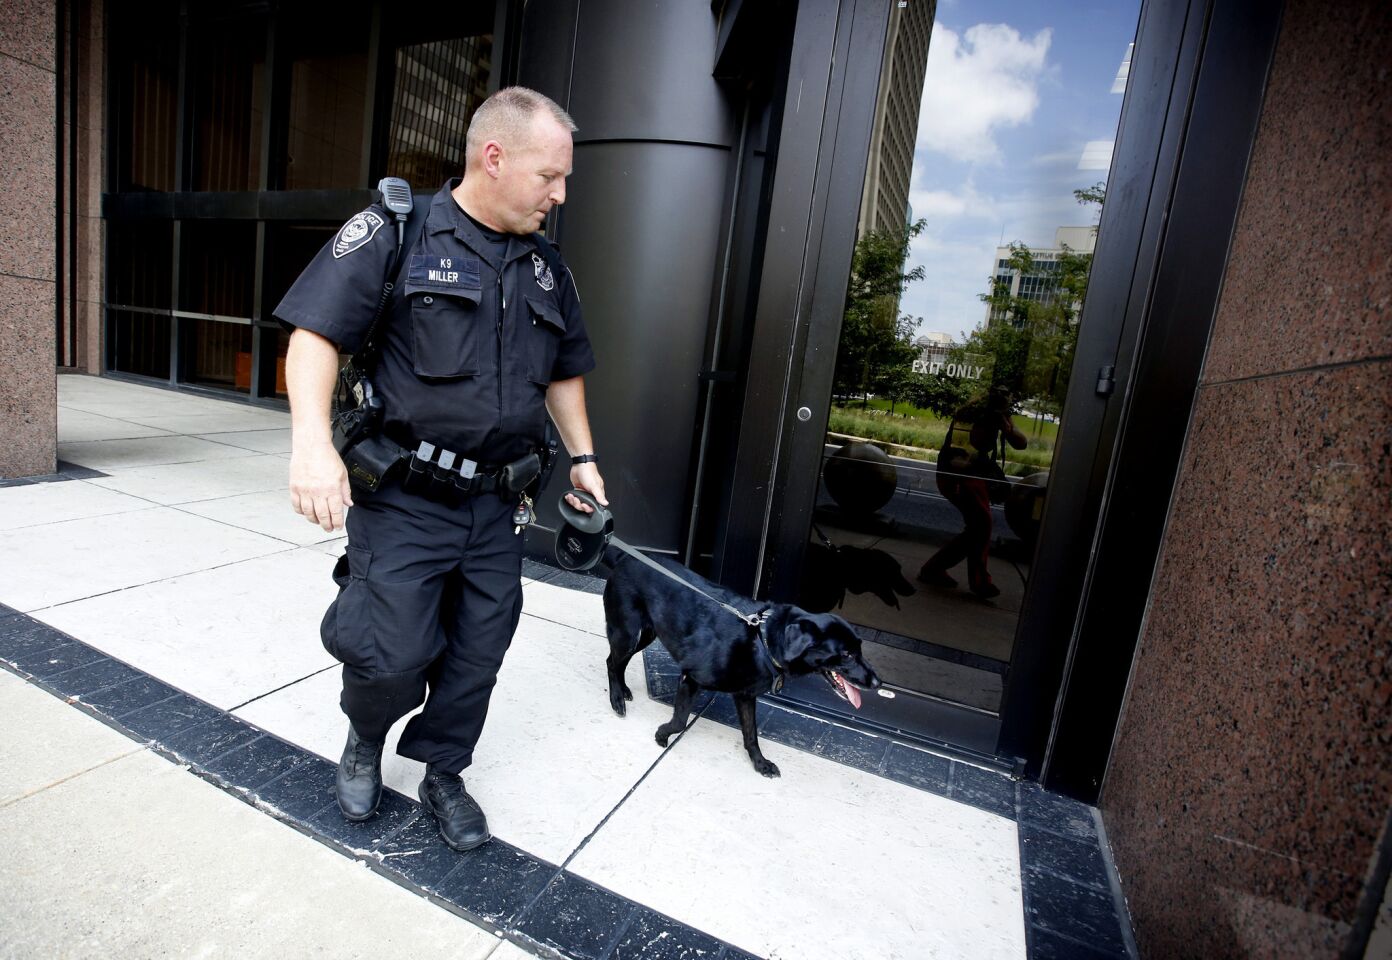 Homeland Security Agent, Ron Miller, of San Antonio, works with his bomb sniffing dog, Mattie, along the Earle Cabel Federal Building in downtown Dallas.